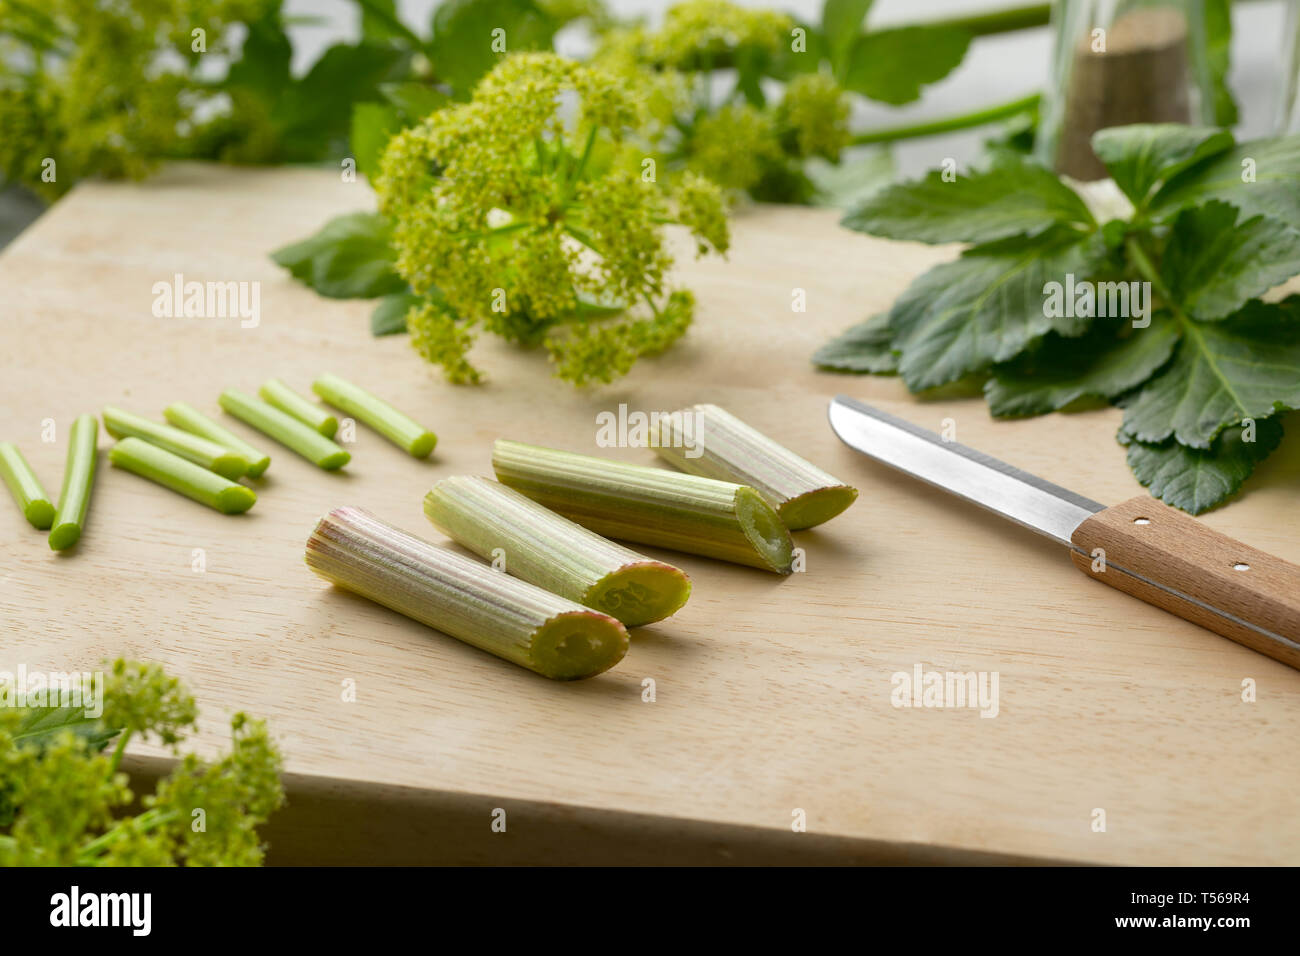 Blooming Alexanders plant cutting to cook as vegetable for dinner Stock Photo